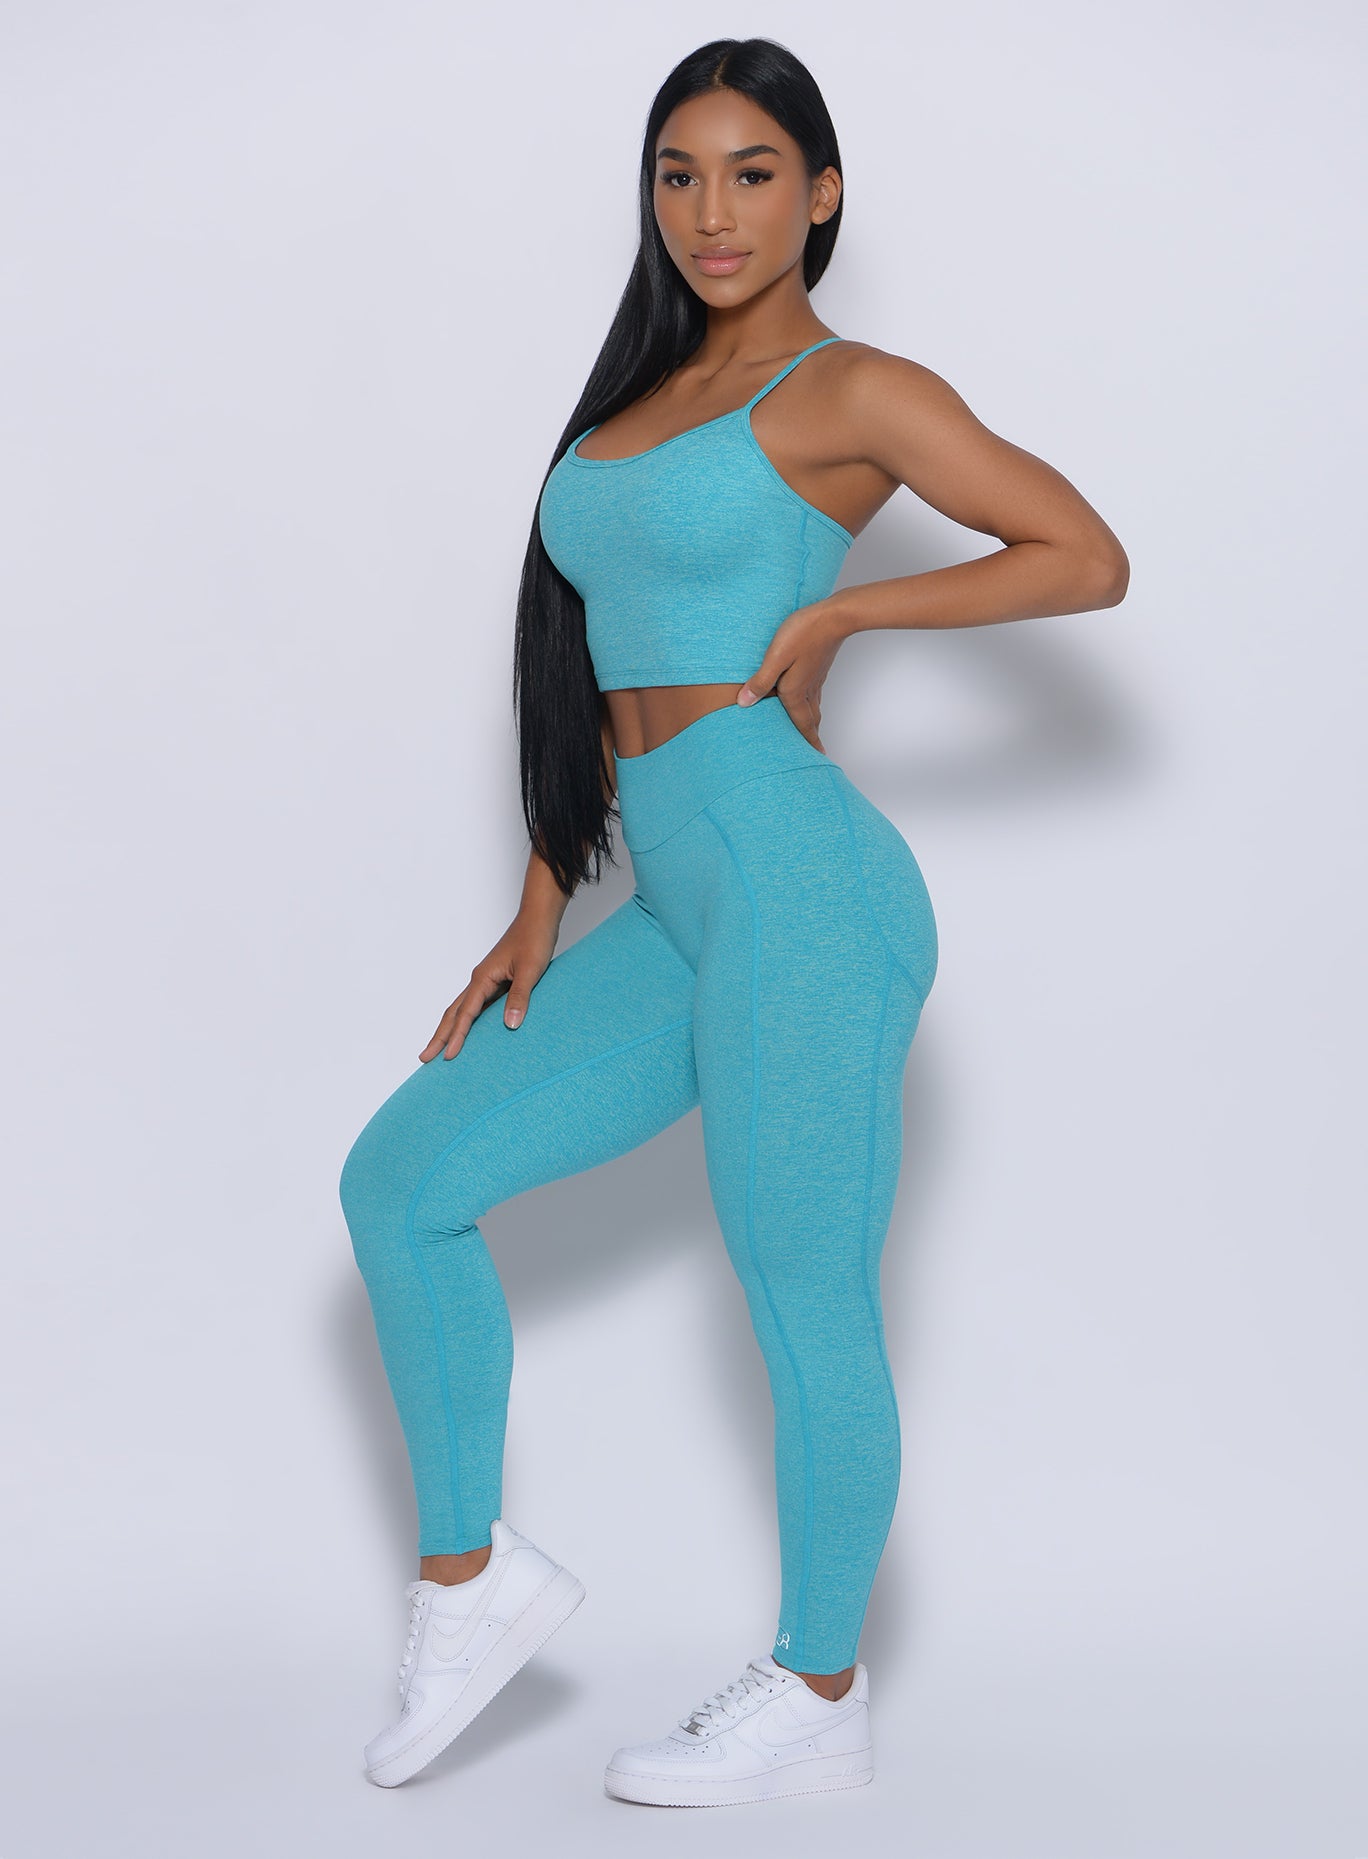 Right side view of a model with her left hand on waist wearing our uplift leggings in crystal blue color and a matching bra 